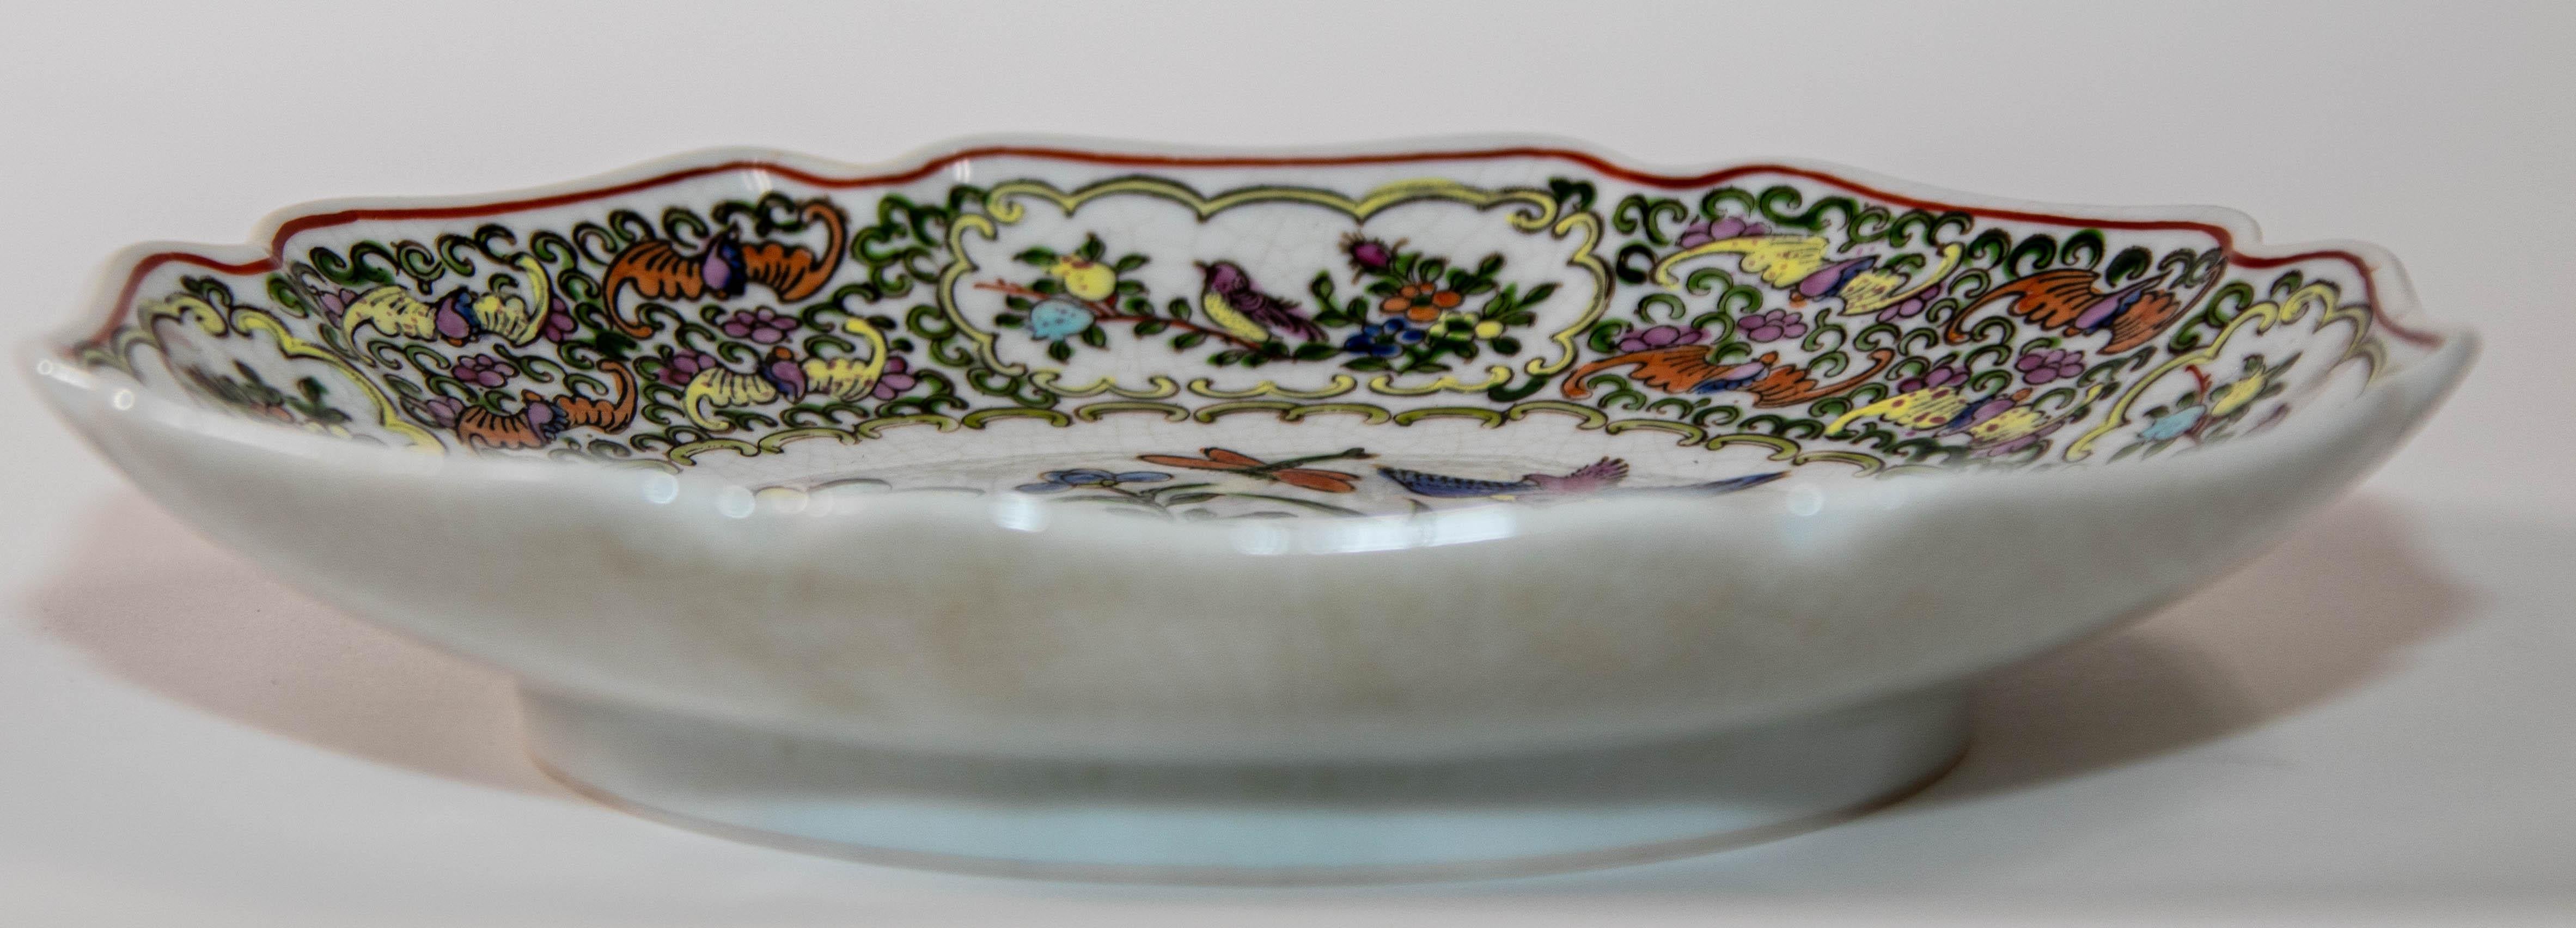 Vintage famille Rose Porcelain plate with birds and flowers hand painted decor For Sale 1